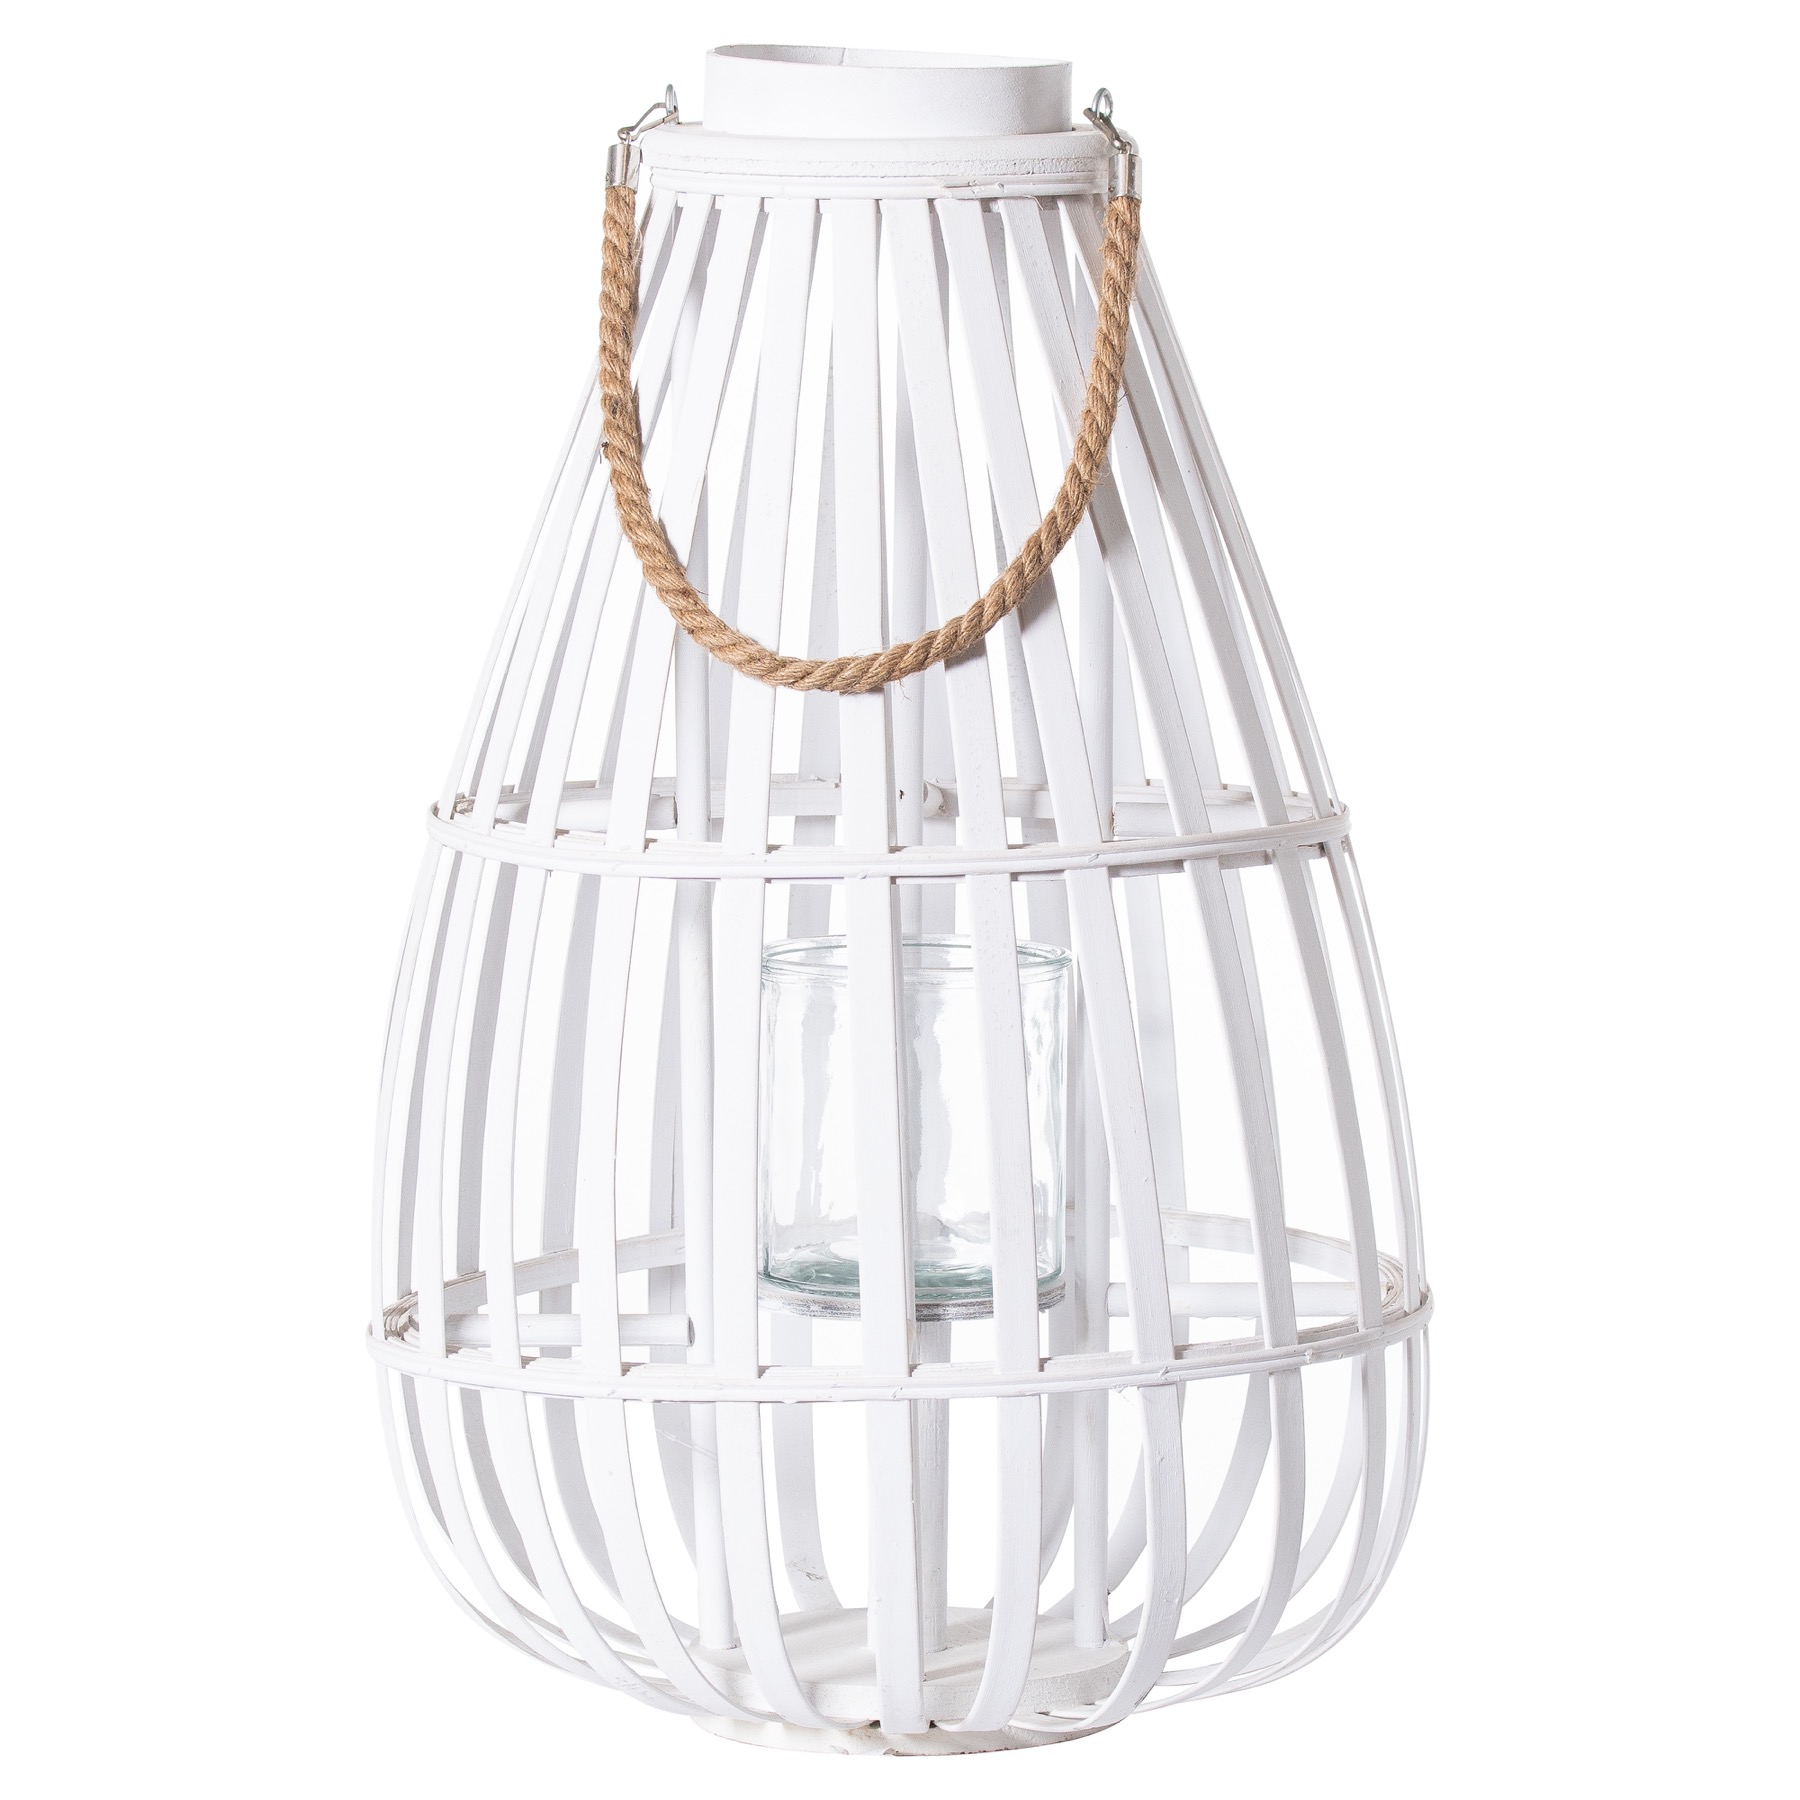 White Floor Standing Domed Wicker Lantern With Rope Detail - Image 1